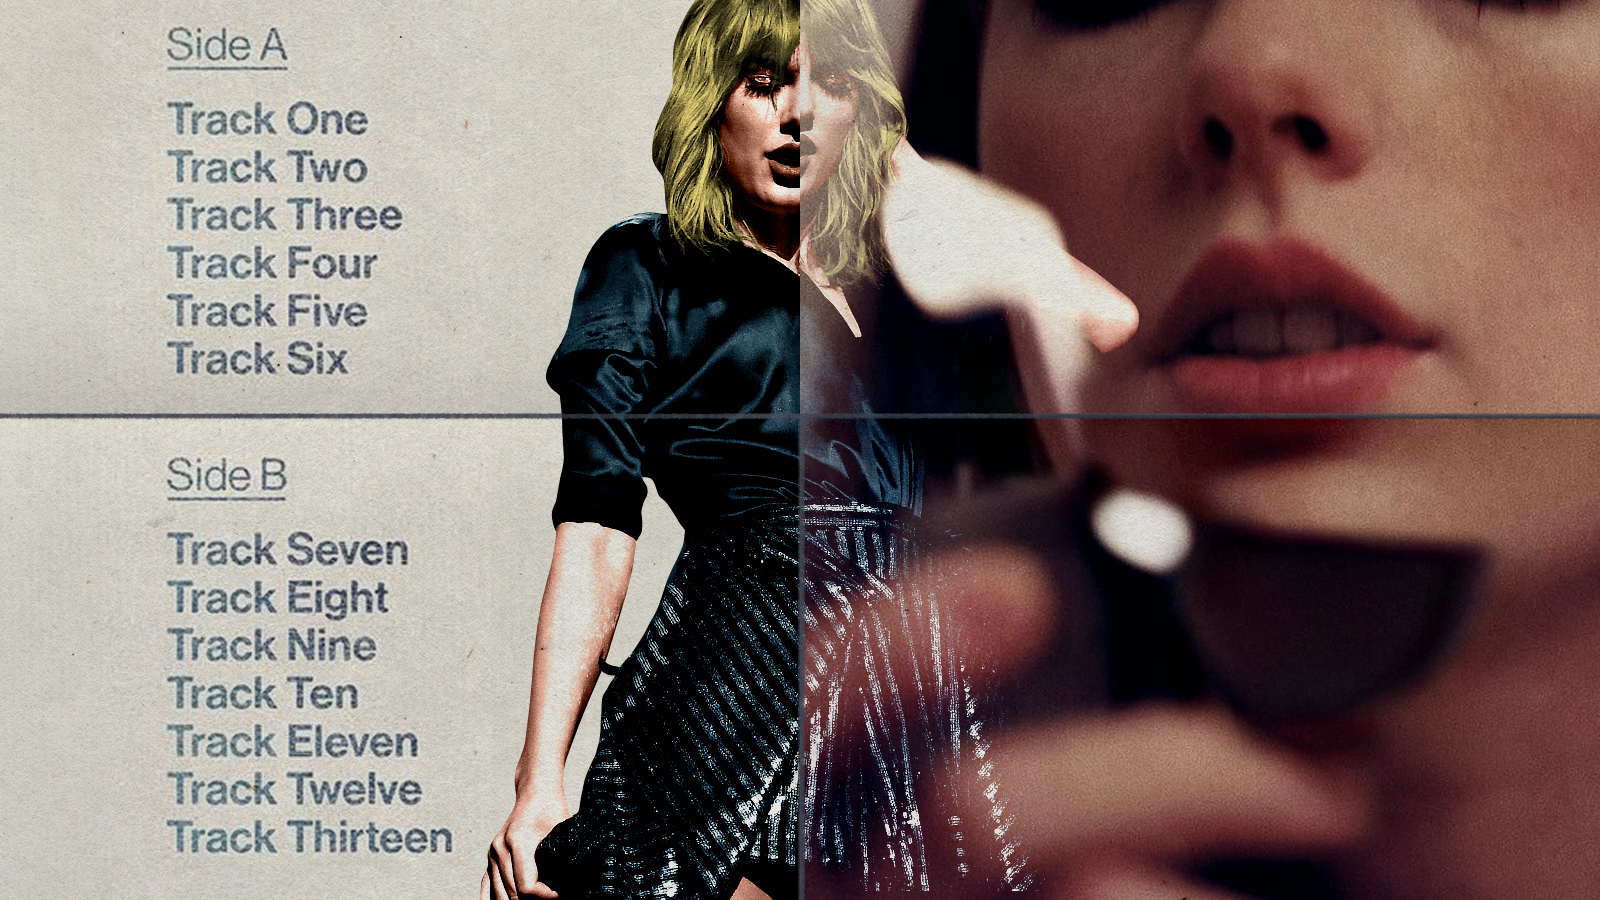 Taylor Swift's Midnights: The best Easter eggs and fan theories about the album